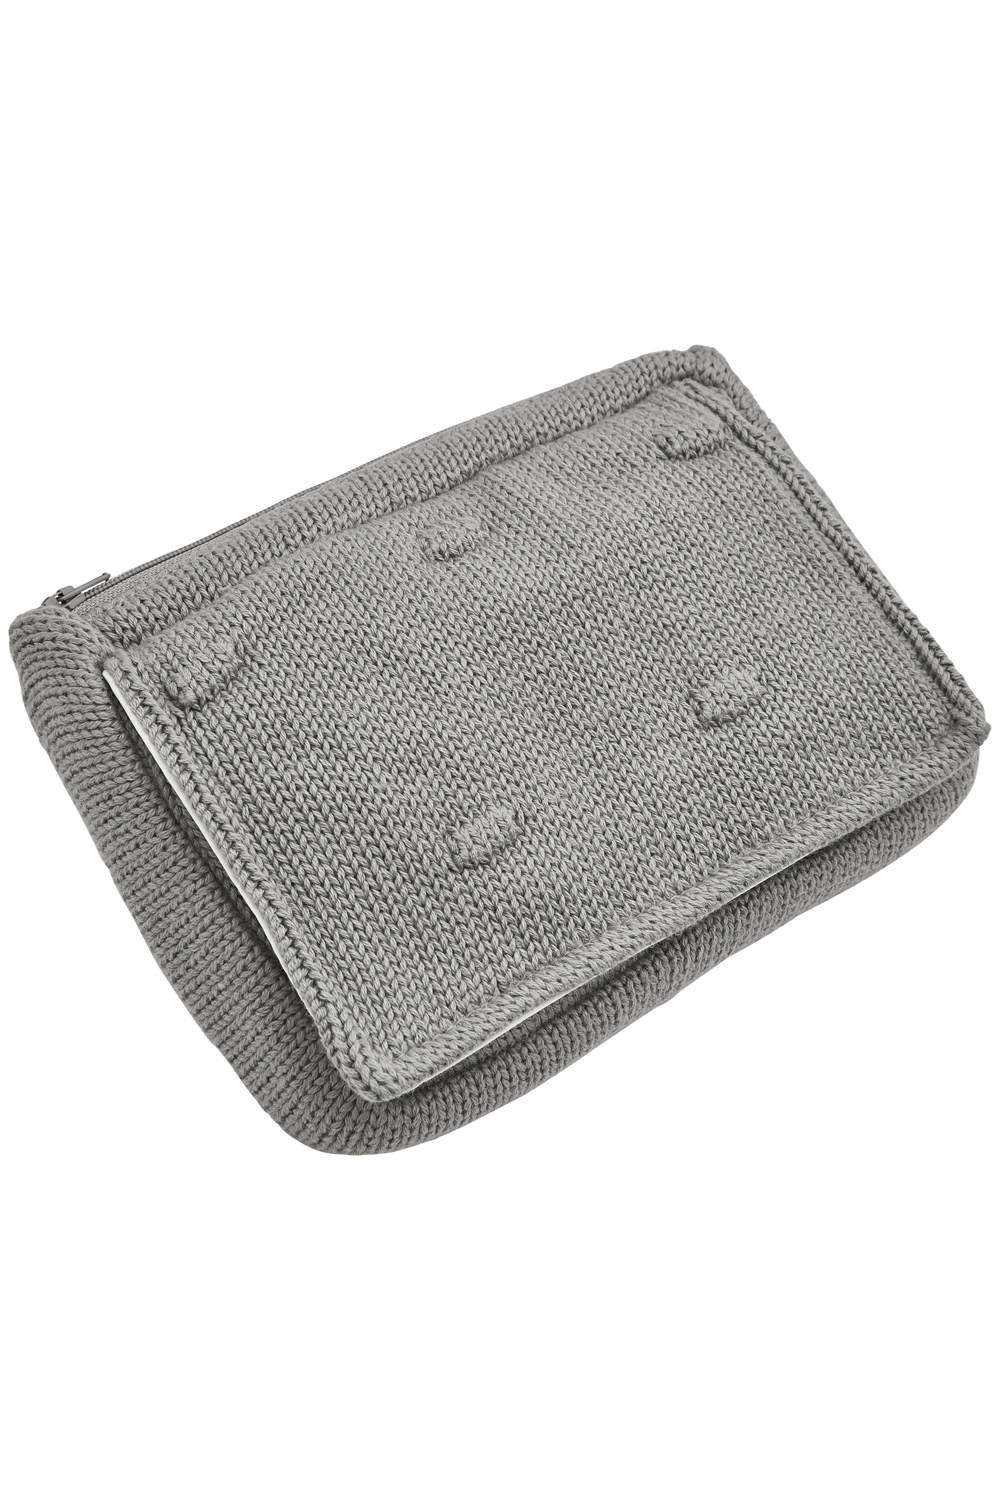 Wipes pouch Knots - grey